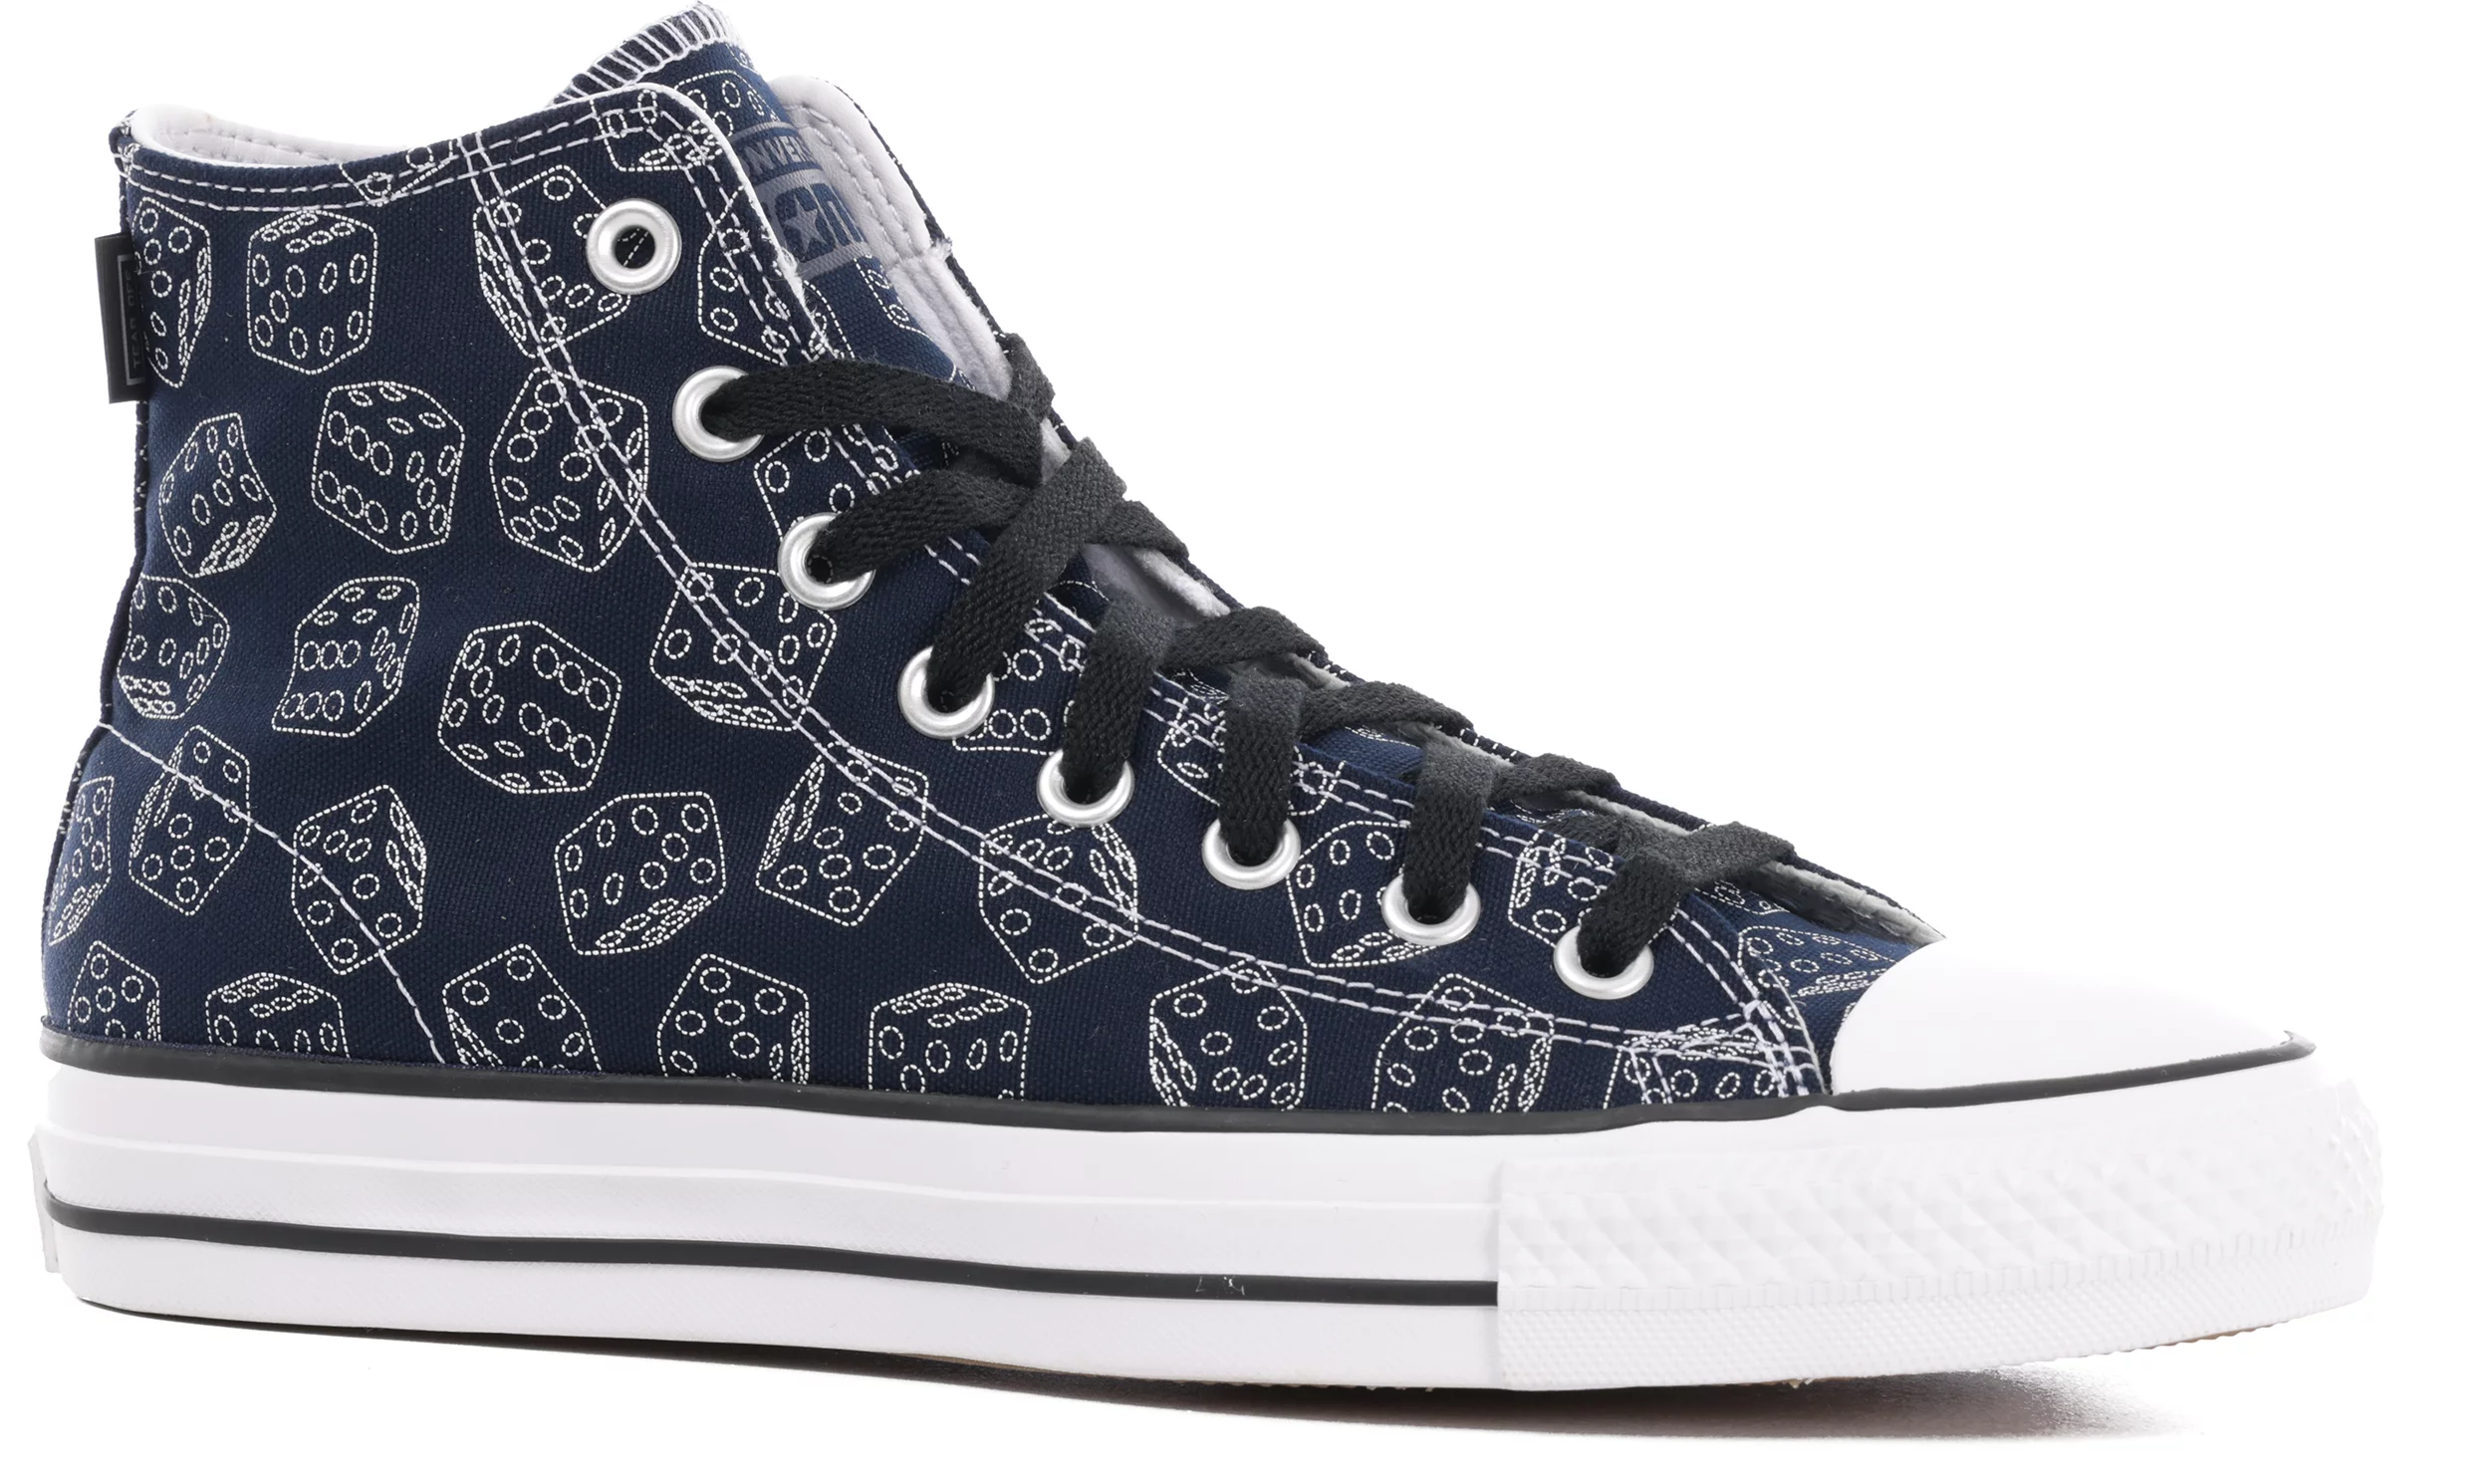 Converse Chuck Taylor All Star Pro High Skate Shoes - (dice print) obsidian/black/white |